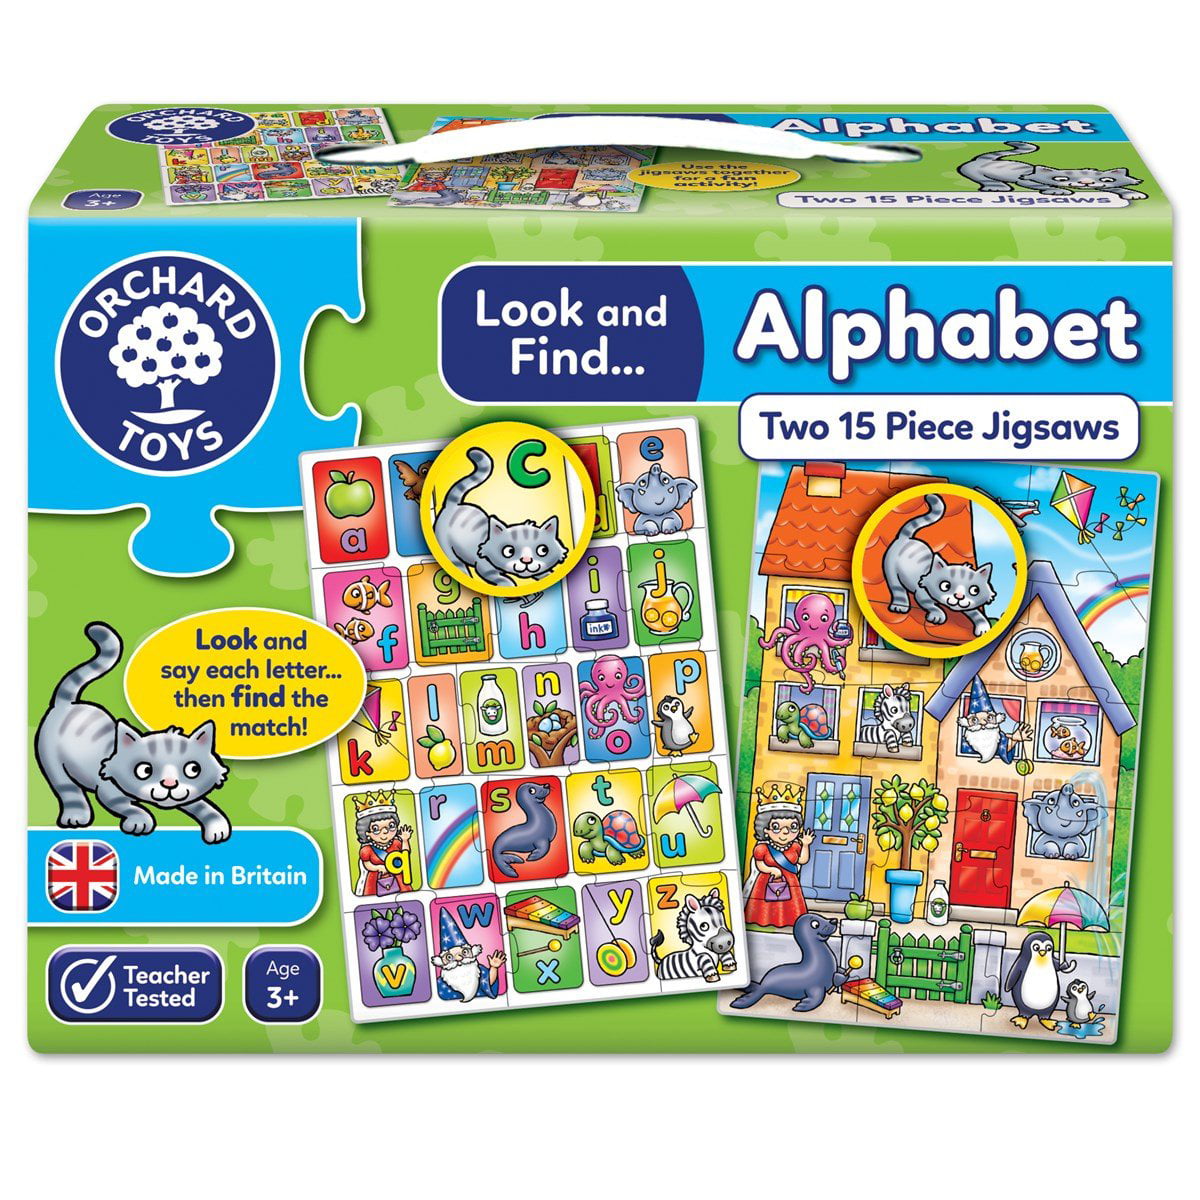 Orchard Toys LOOK AND FIND ALPHABET Educational Game Puzzle BN 